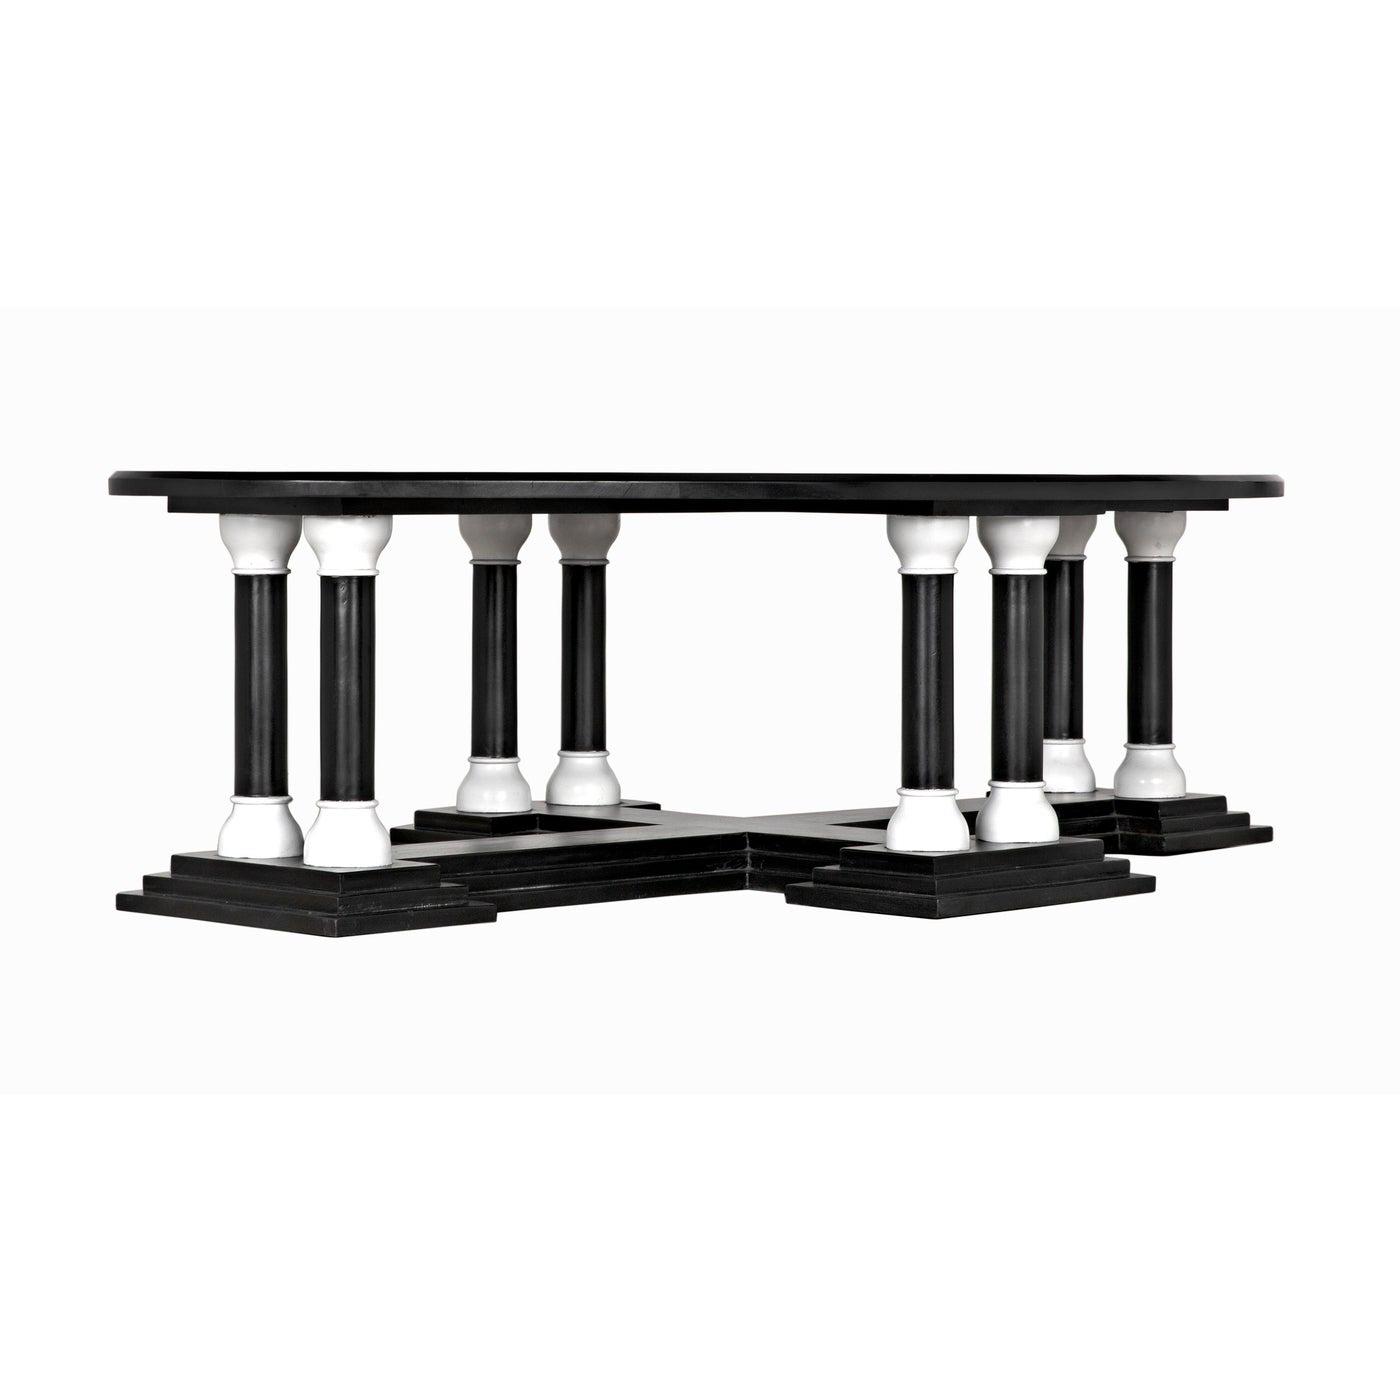 Noir Desoto Coffee Table, Hand Rubbed Black and Solid White-Noir Furniture-Blue Hand Home